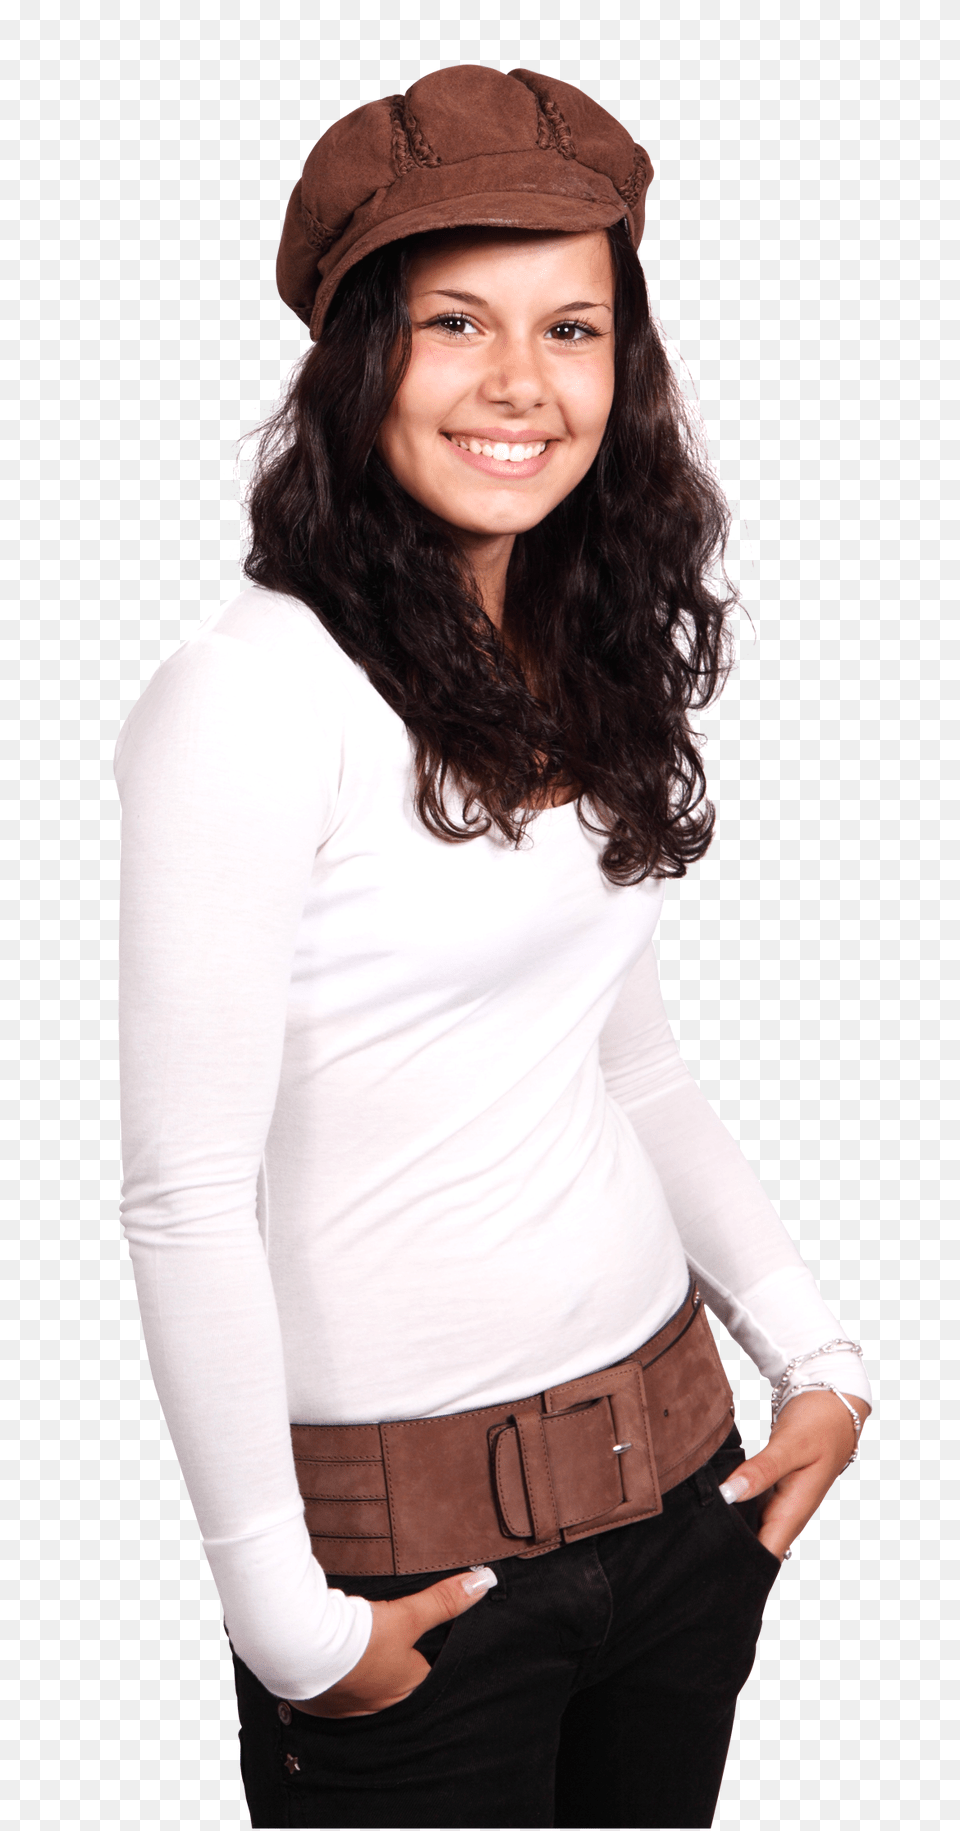 Pngpix Com Young Smiling Woman Wearing A White T Shirt And Brown Cap Sleeve, Long Sleeve, Hat, Clothing Png Image